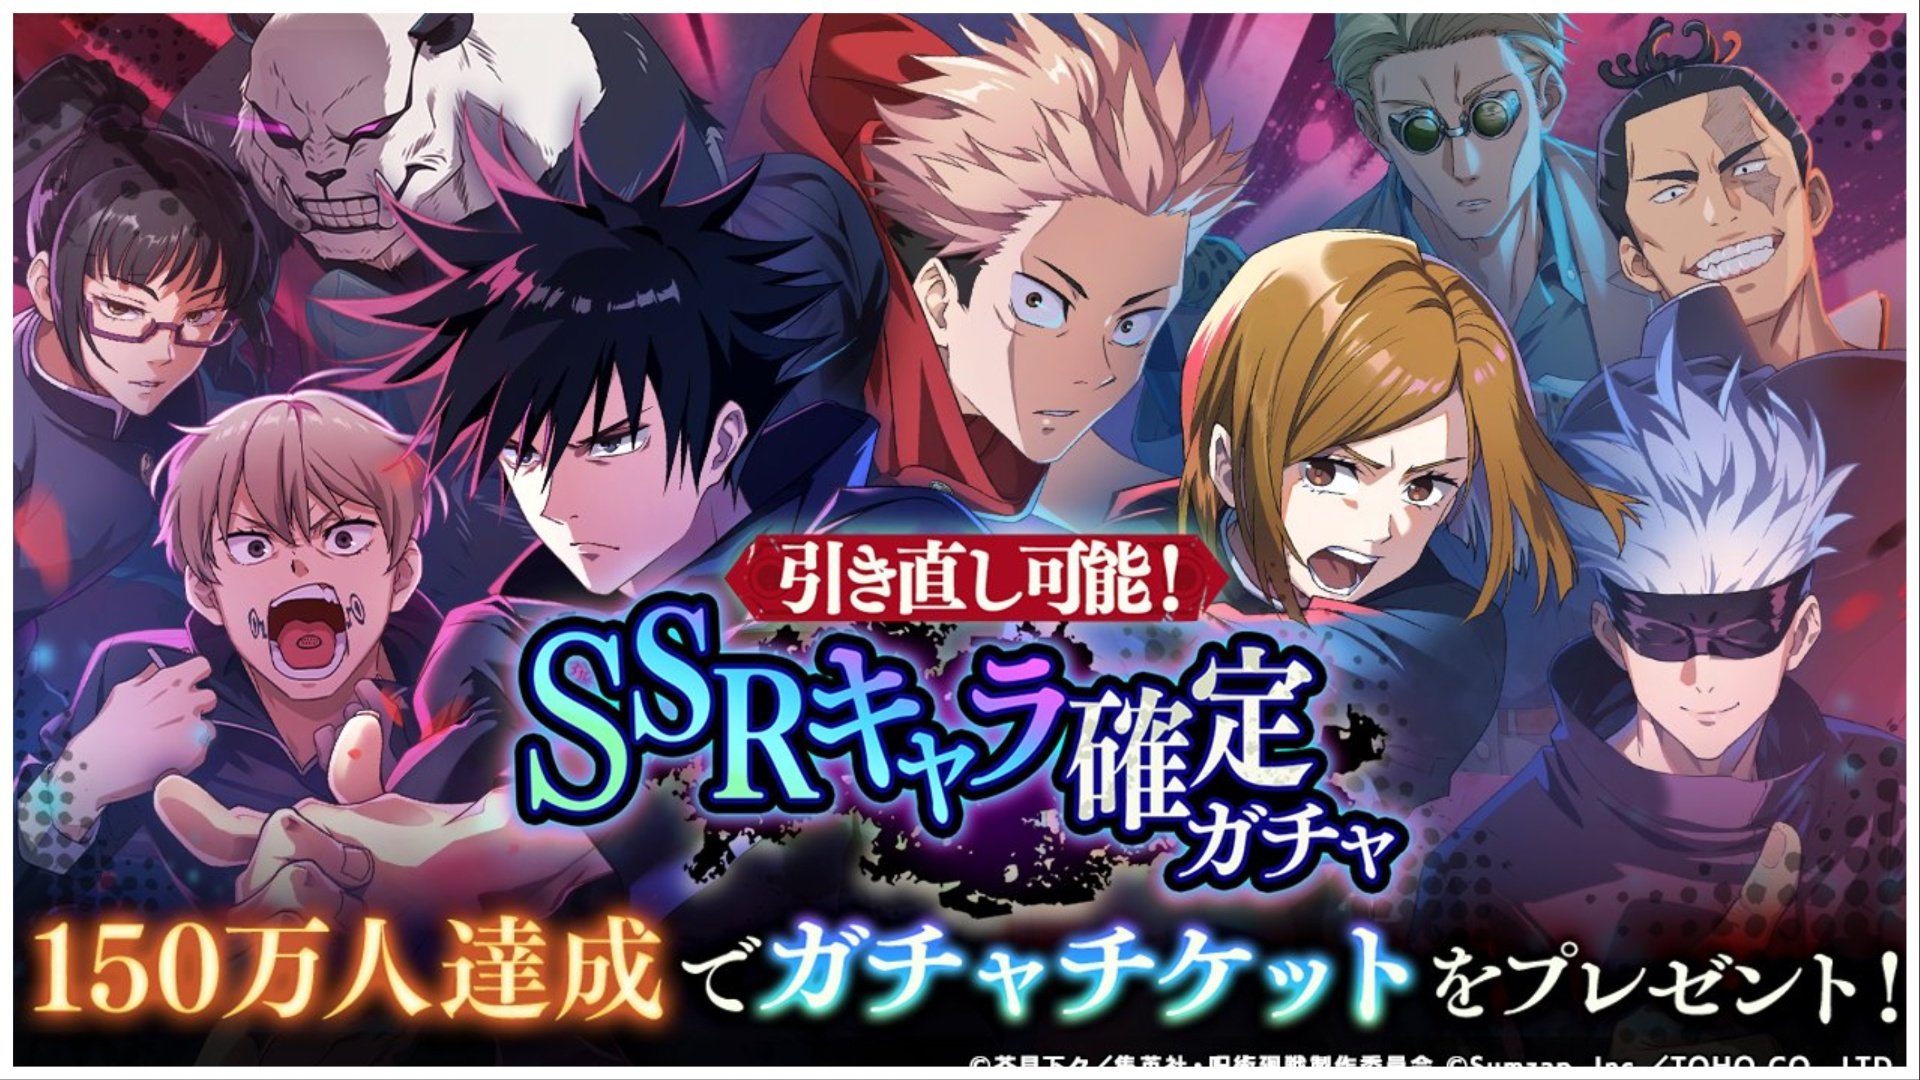 A Specialz Announcement, Jujutsu Kaisen Phantom Parade Launching In Japan Today! - Droid Gamers